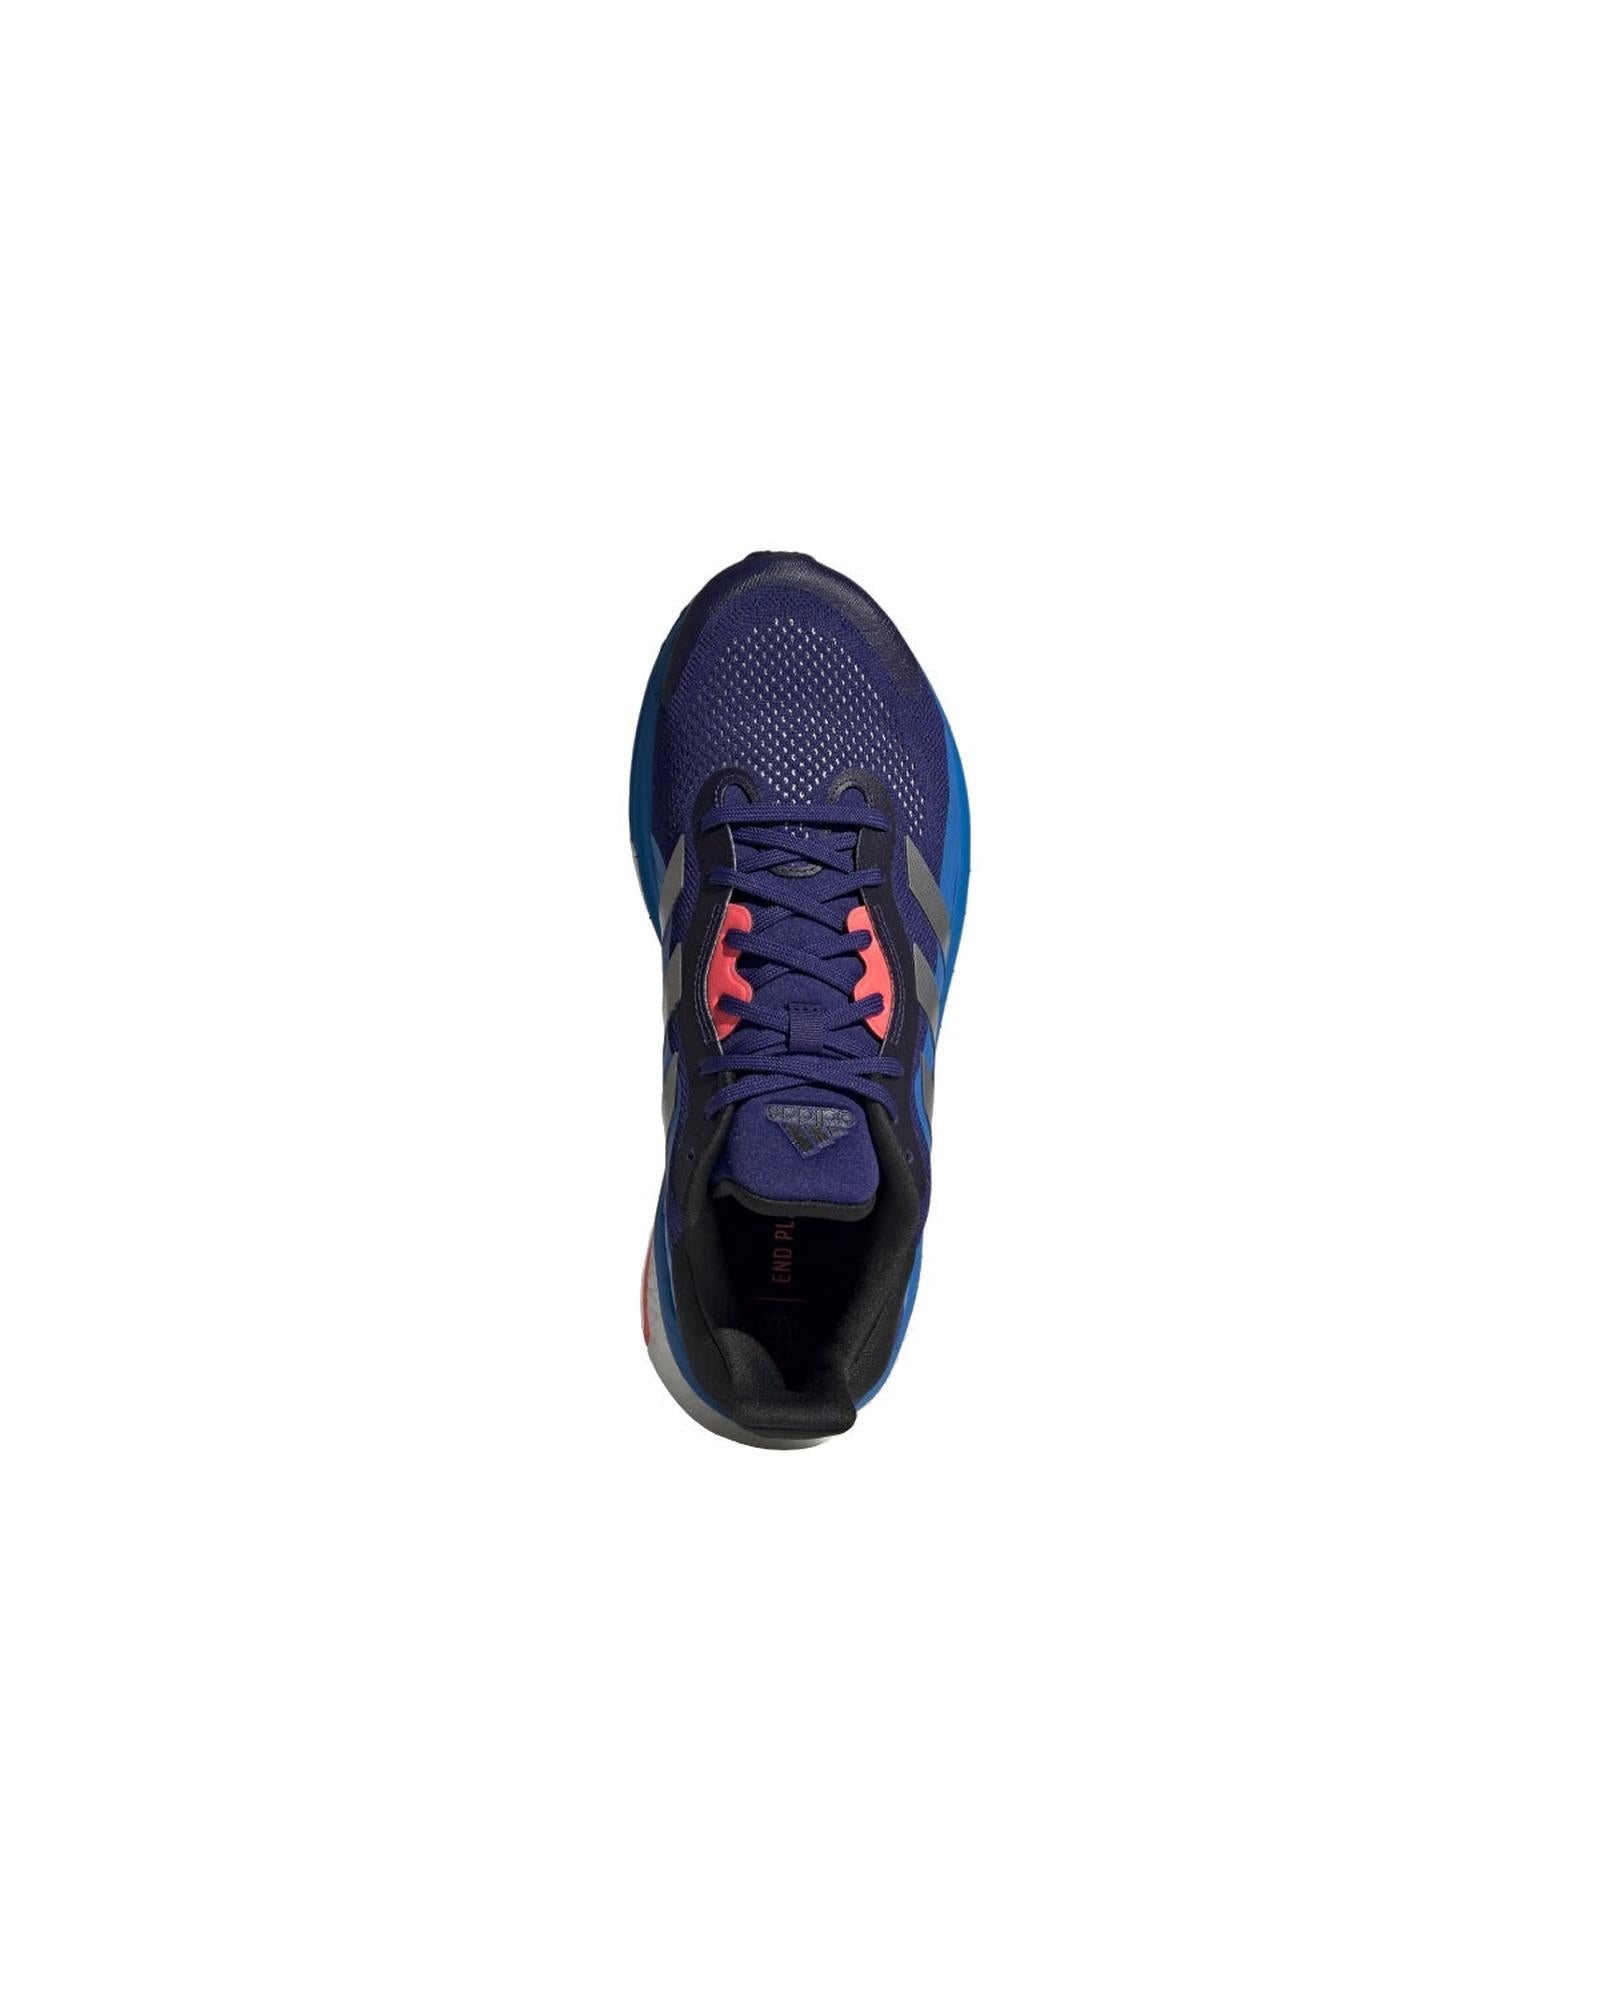 Flexible Running Shoes with Energized Boost Technology - 10.5 US